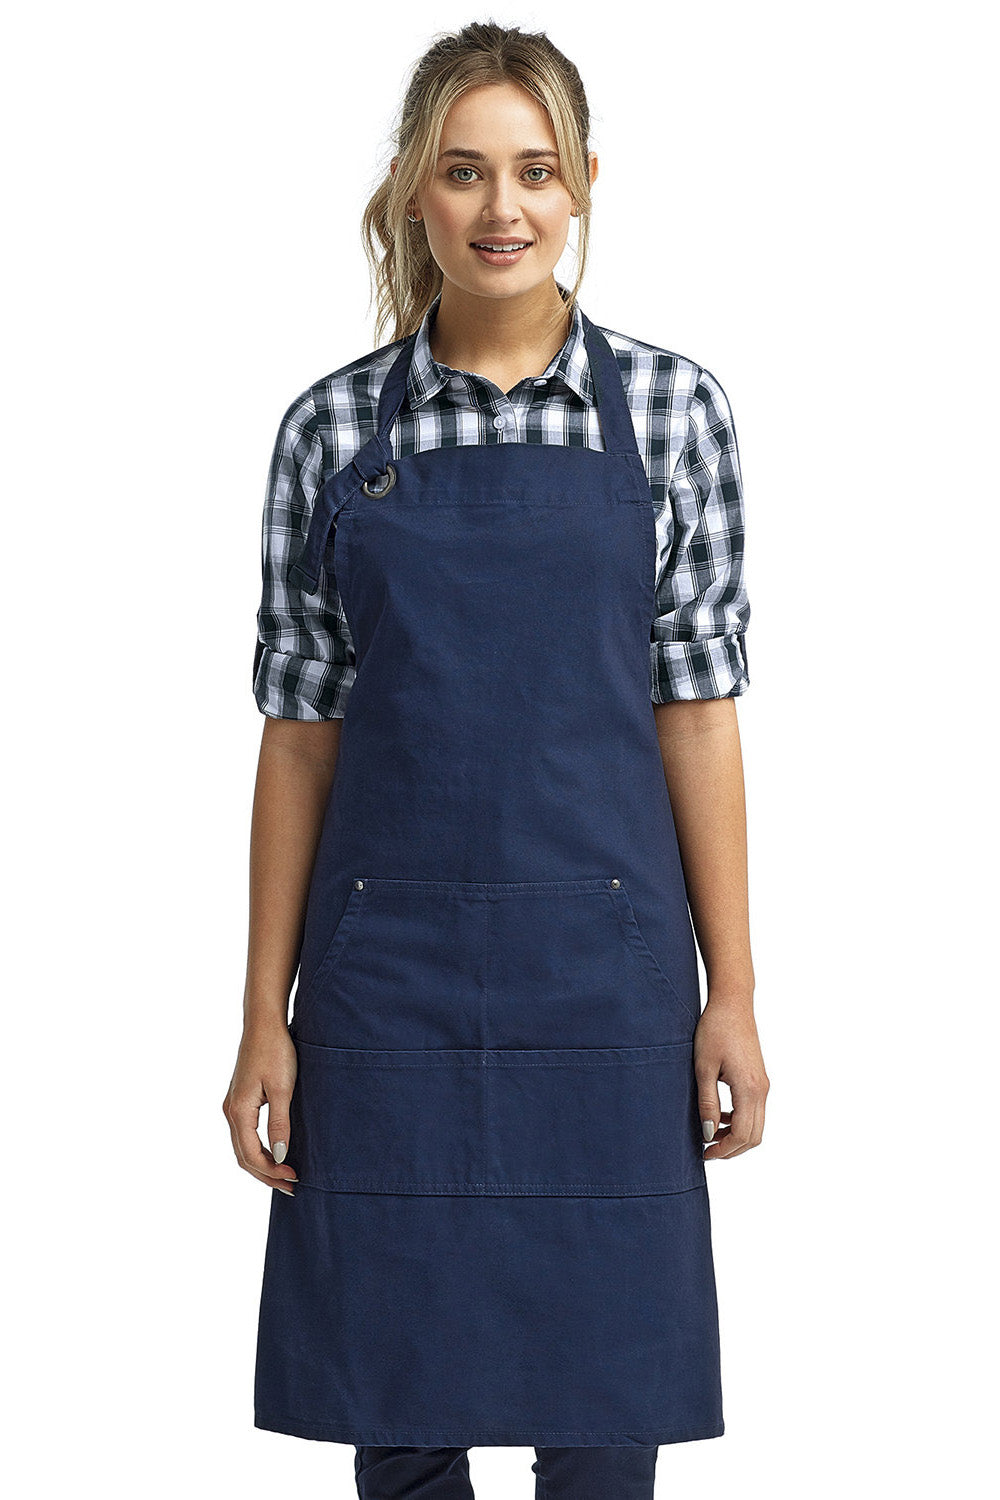 Artisan Collection by Reprime Navy Bib Adjustable Apron (4 Pocket Pouch)